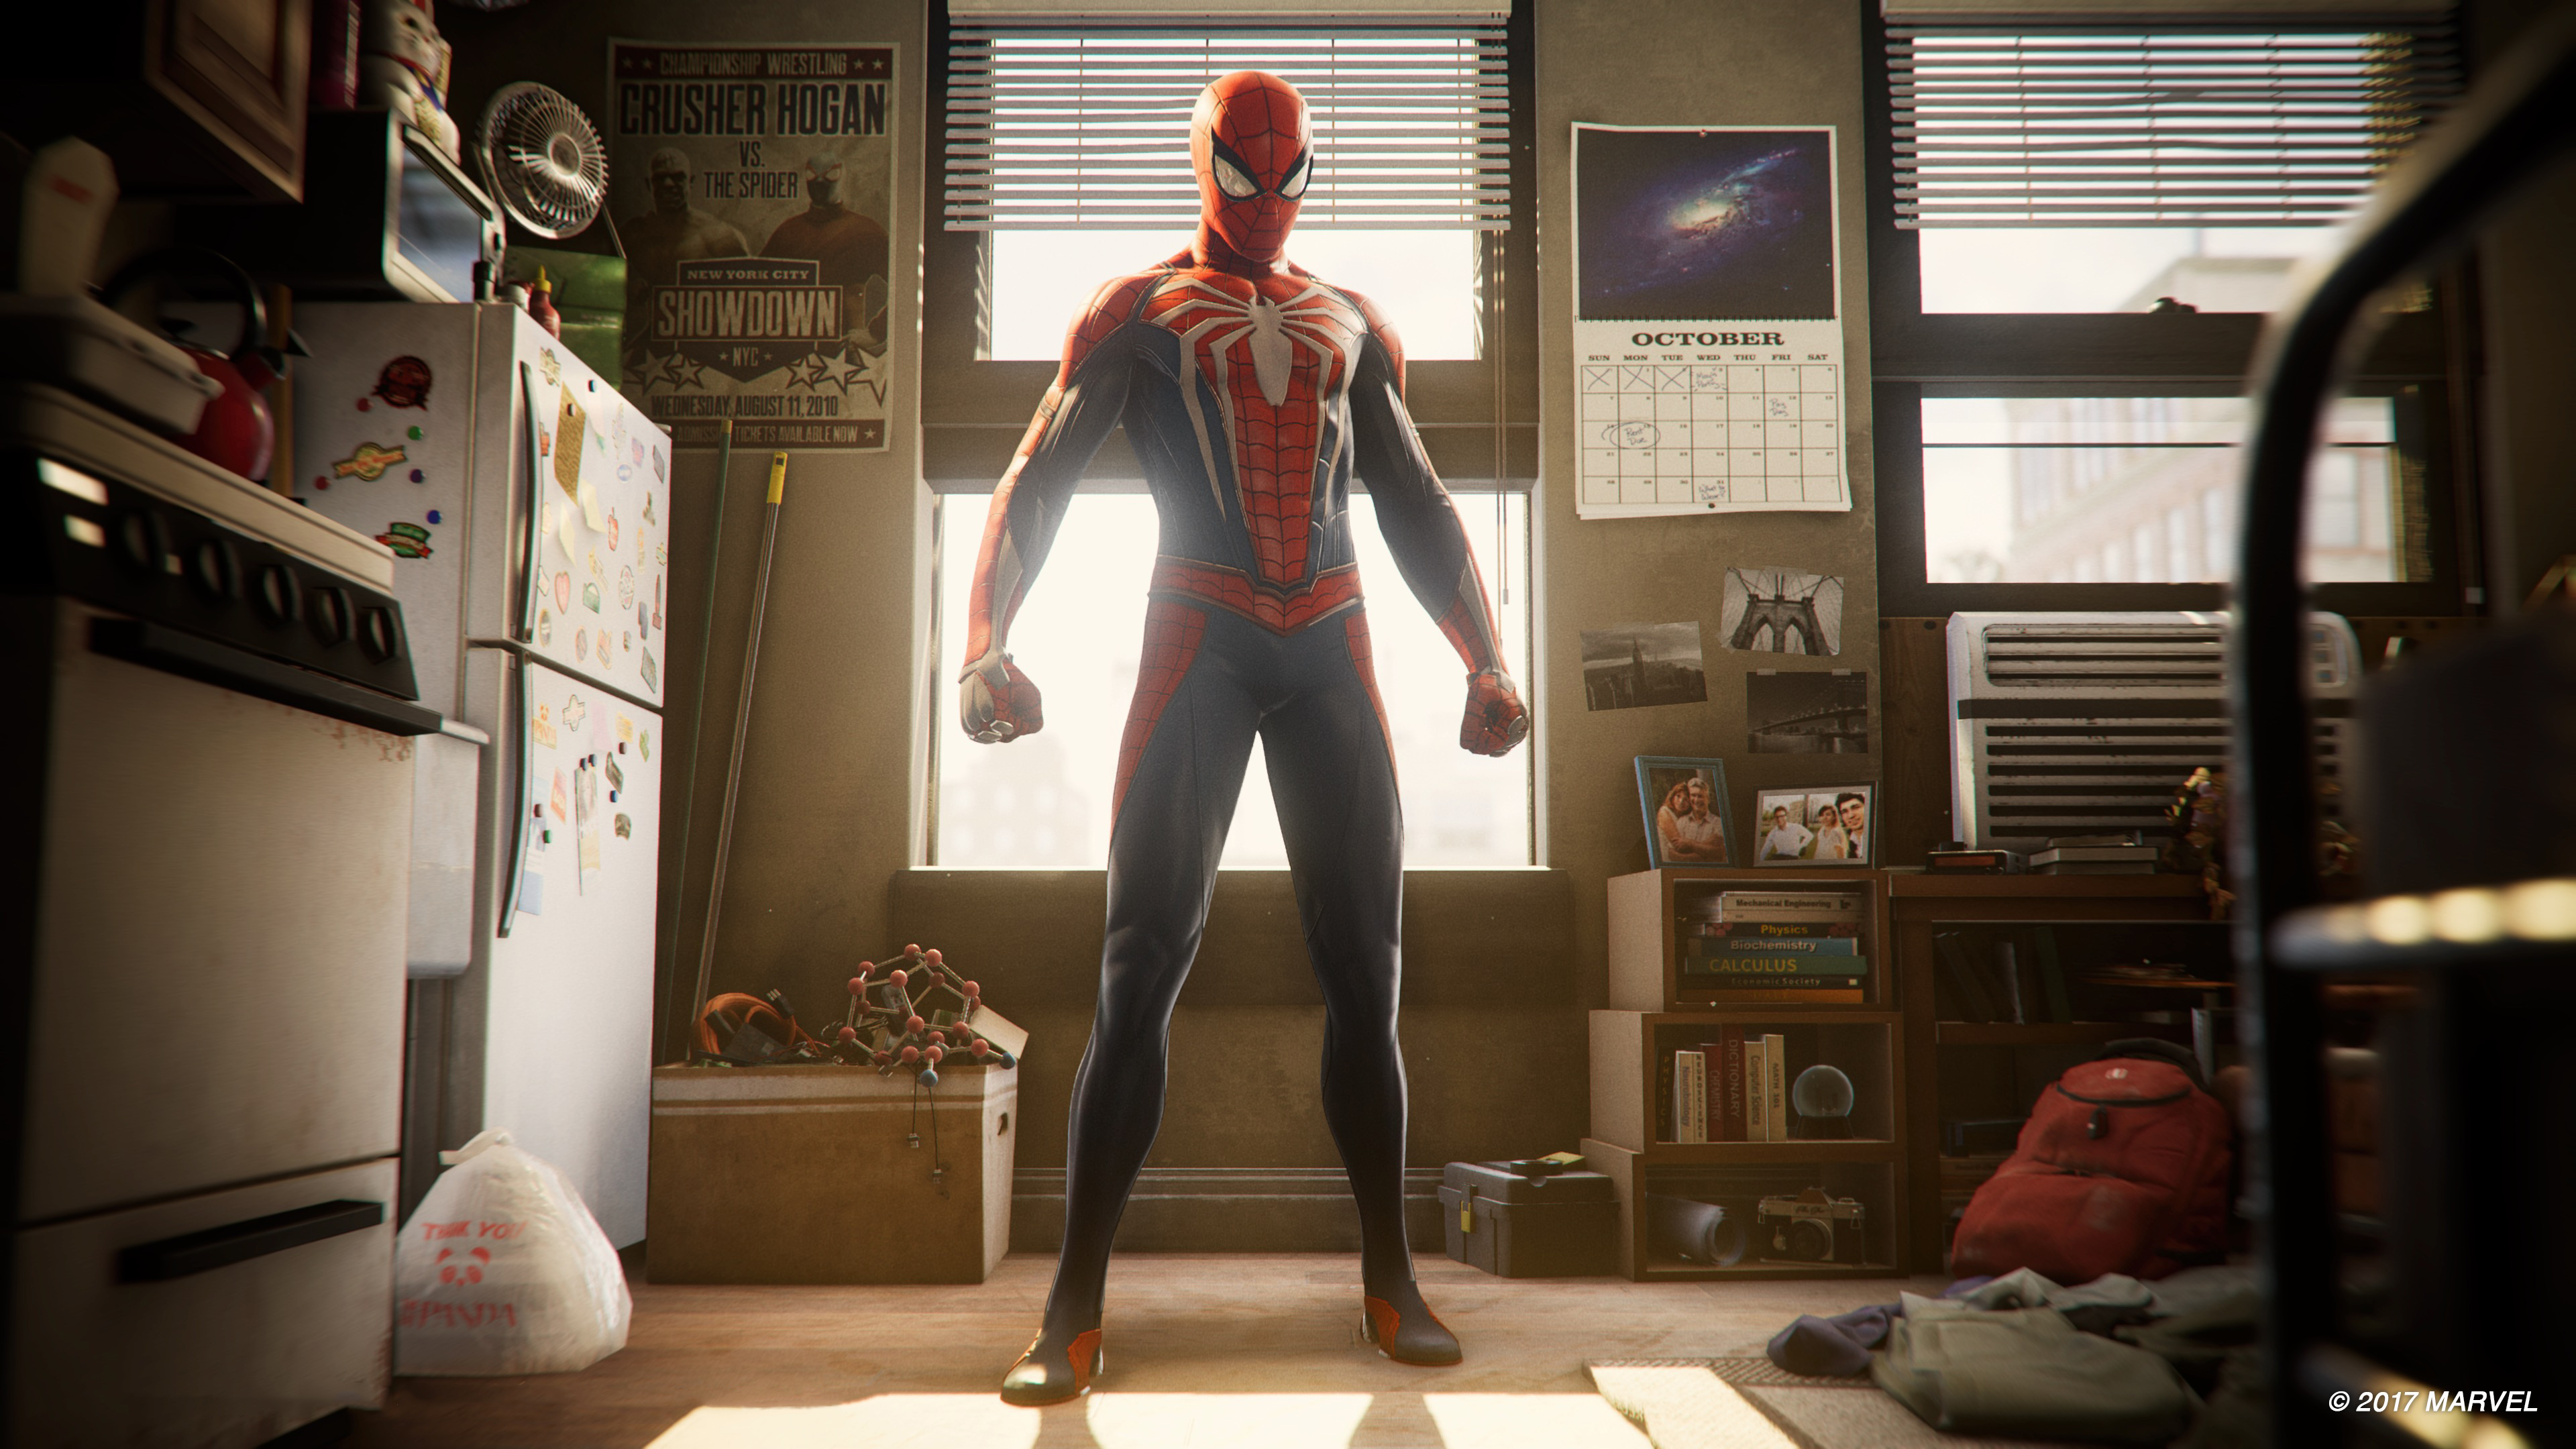 spider man (ps4), spider man, video game, aunt may parker, harry osborn, mary jane watson, peter parker